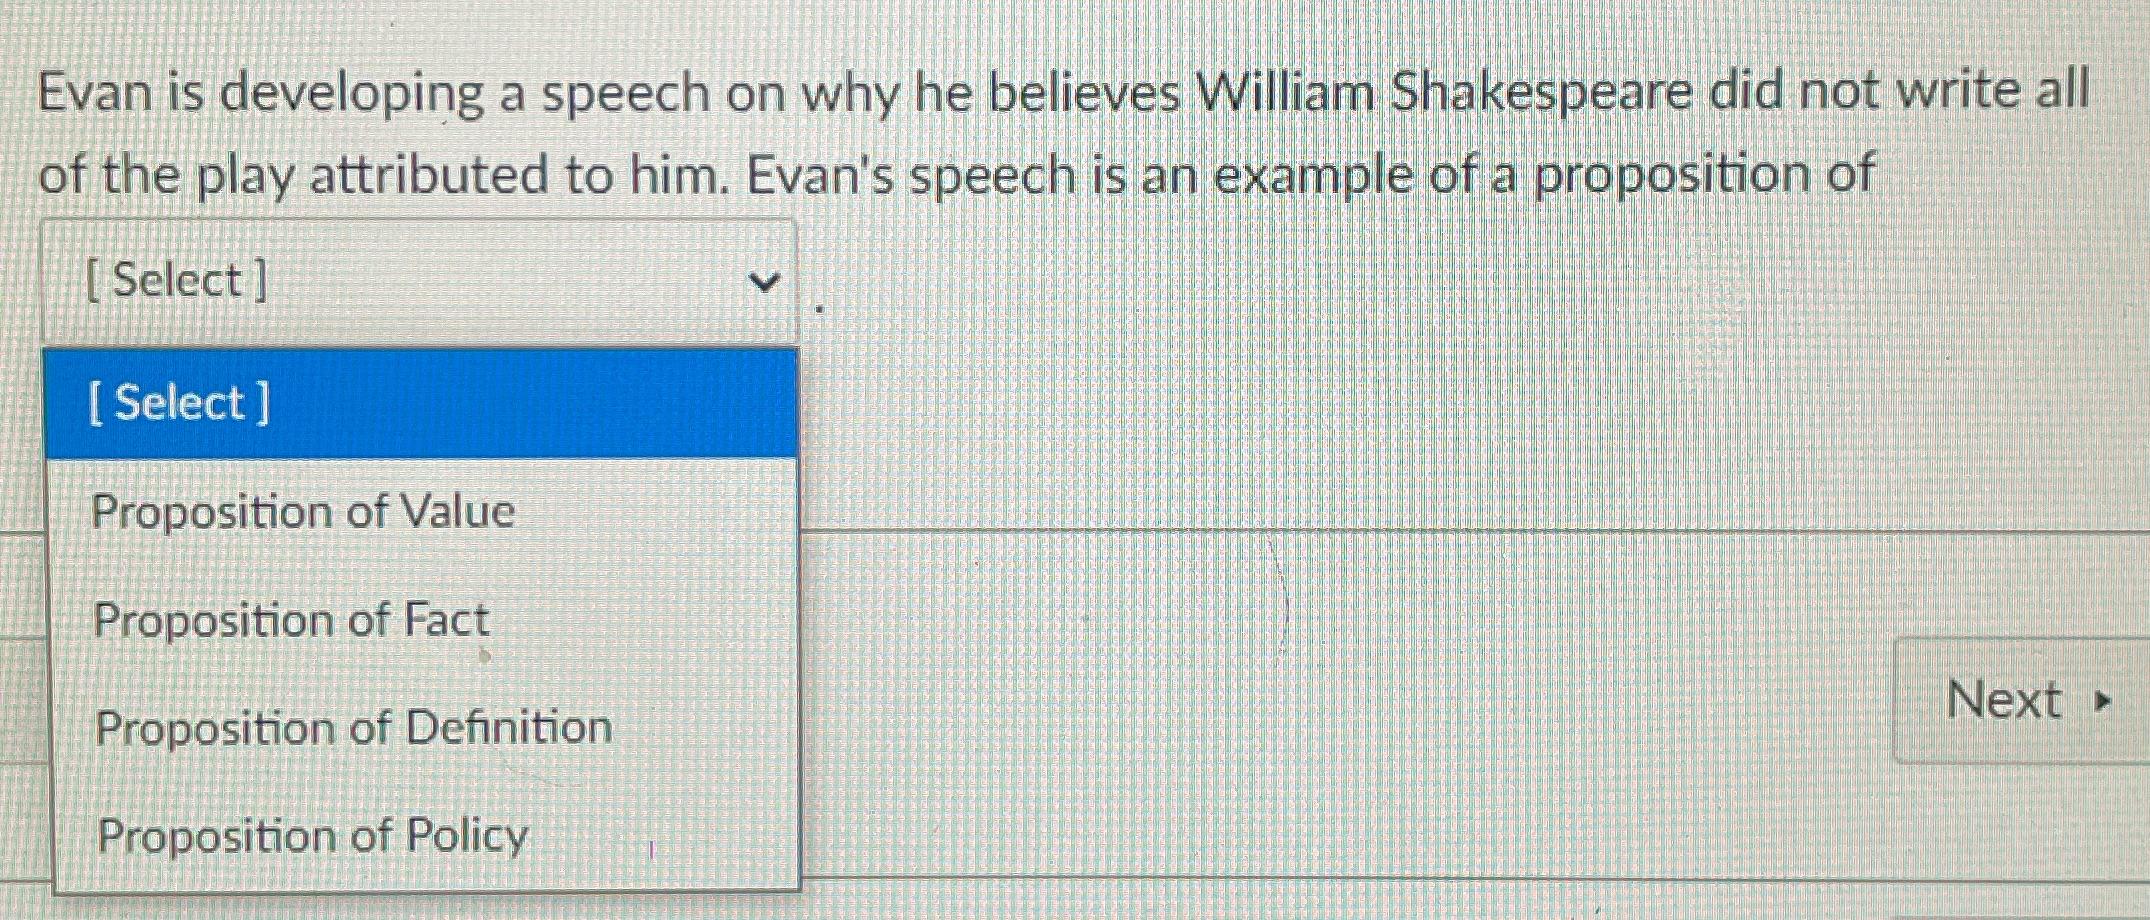 Evan is developing a speech on why he believes William Shakespeare did not write all of the play attributed